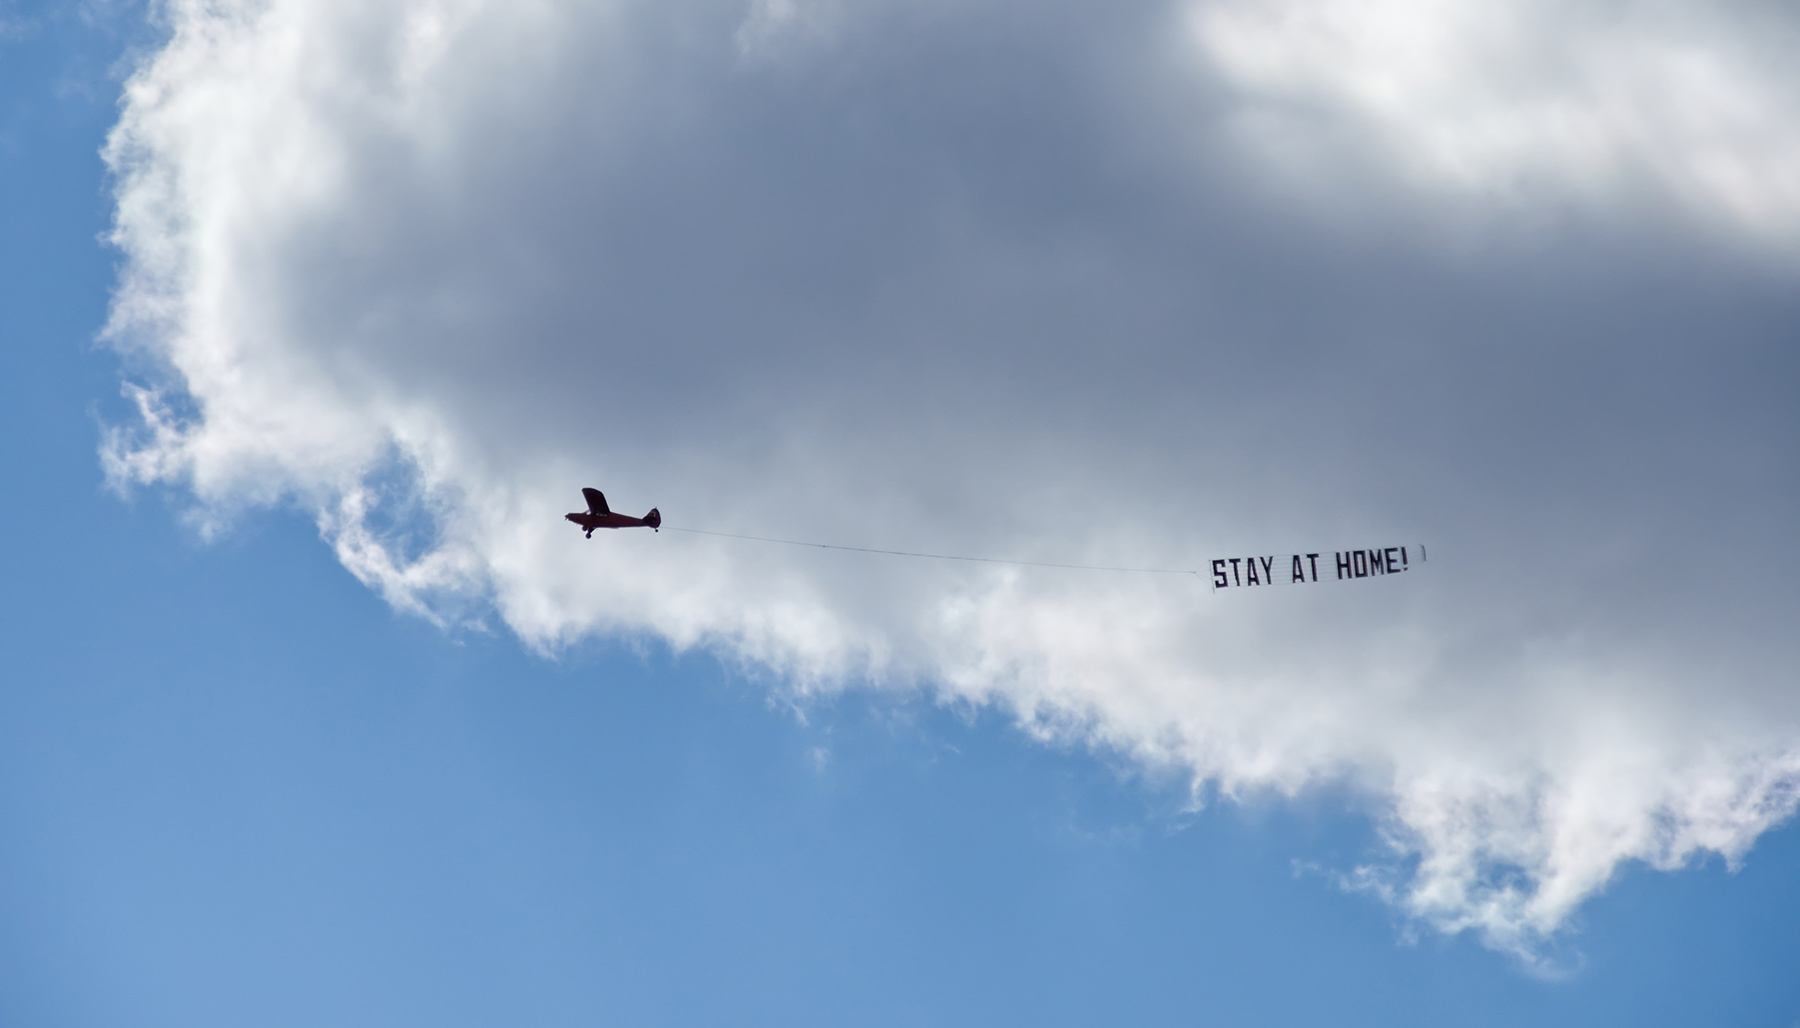 airplane flying and towing a sign behind it that says "stay at home"